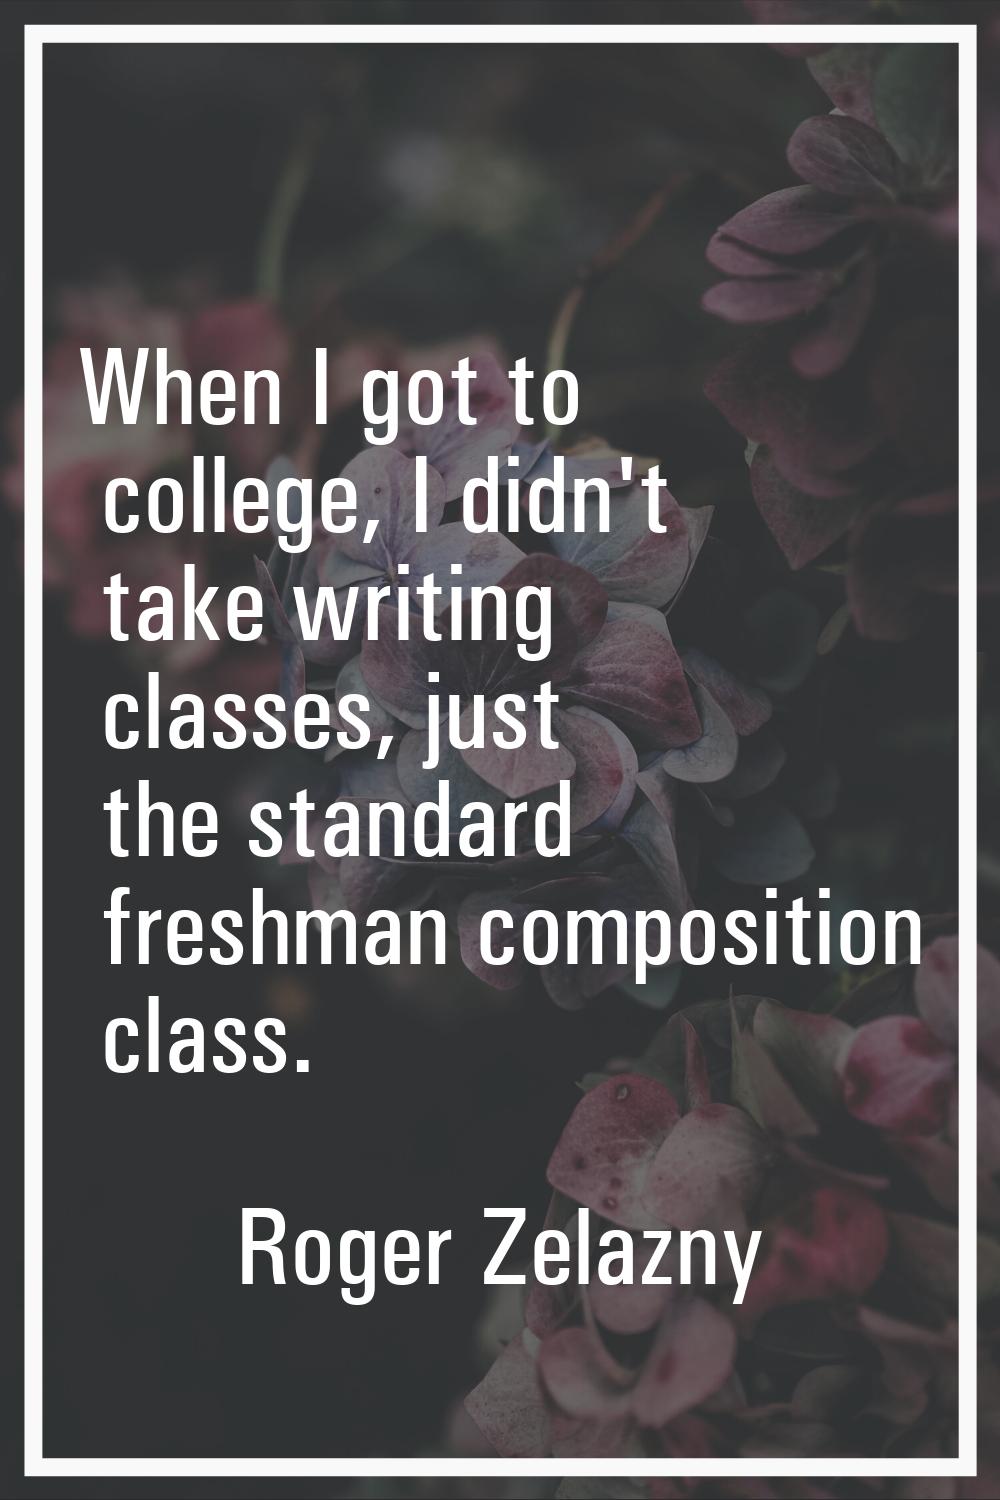 When I got to college, I didn't take writing classes, just the standard freshman composition class.